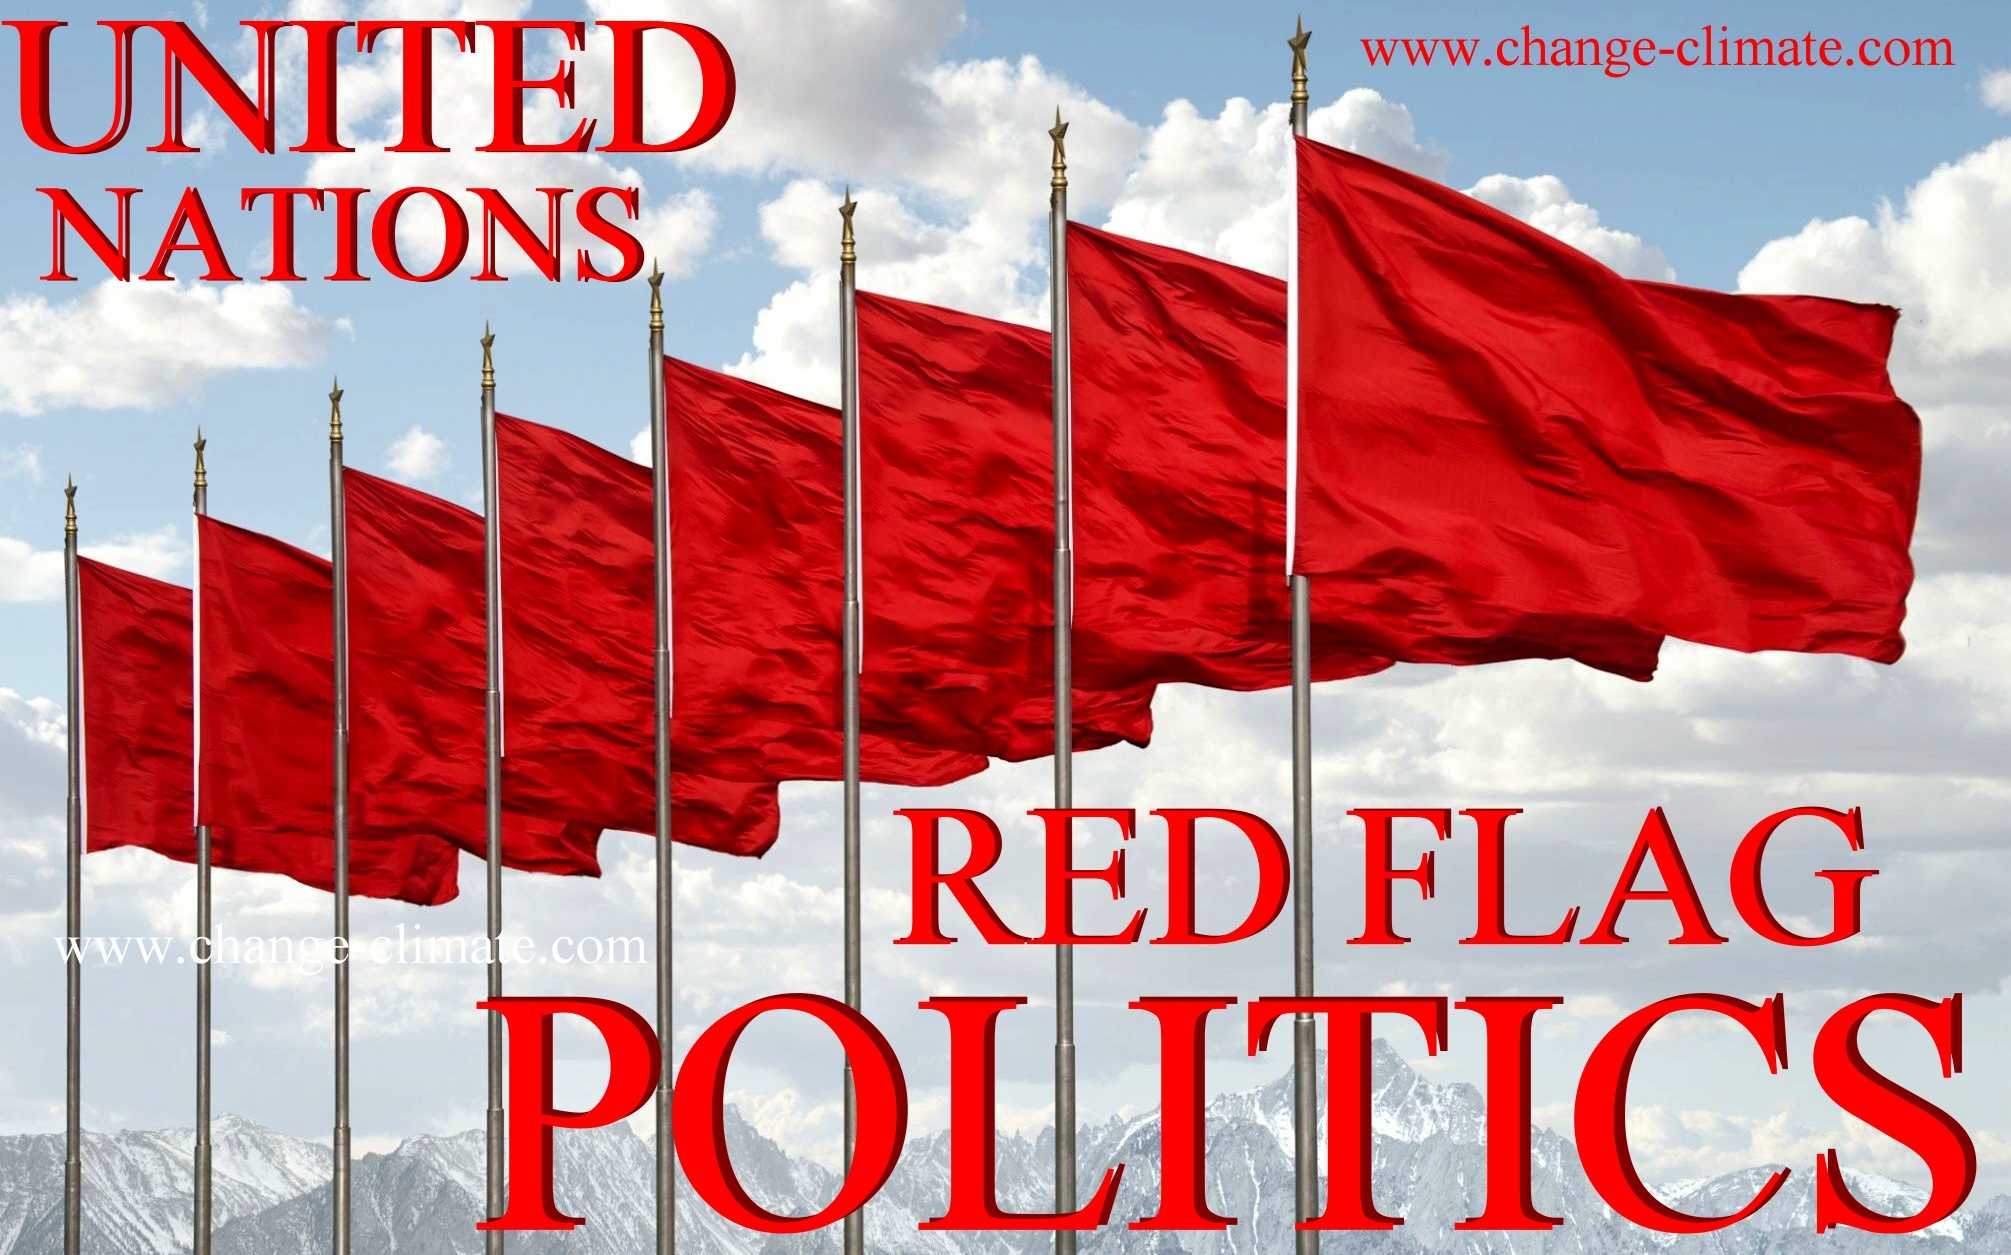 RED FLAG POLITICIANS COULD DESTROY PLANET EARTH